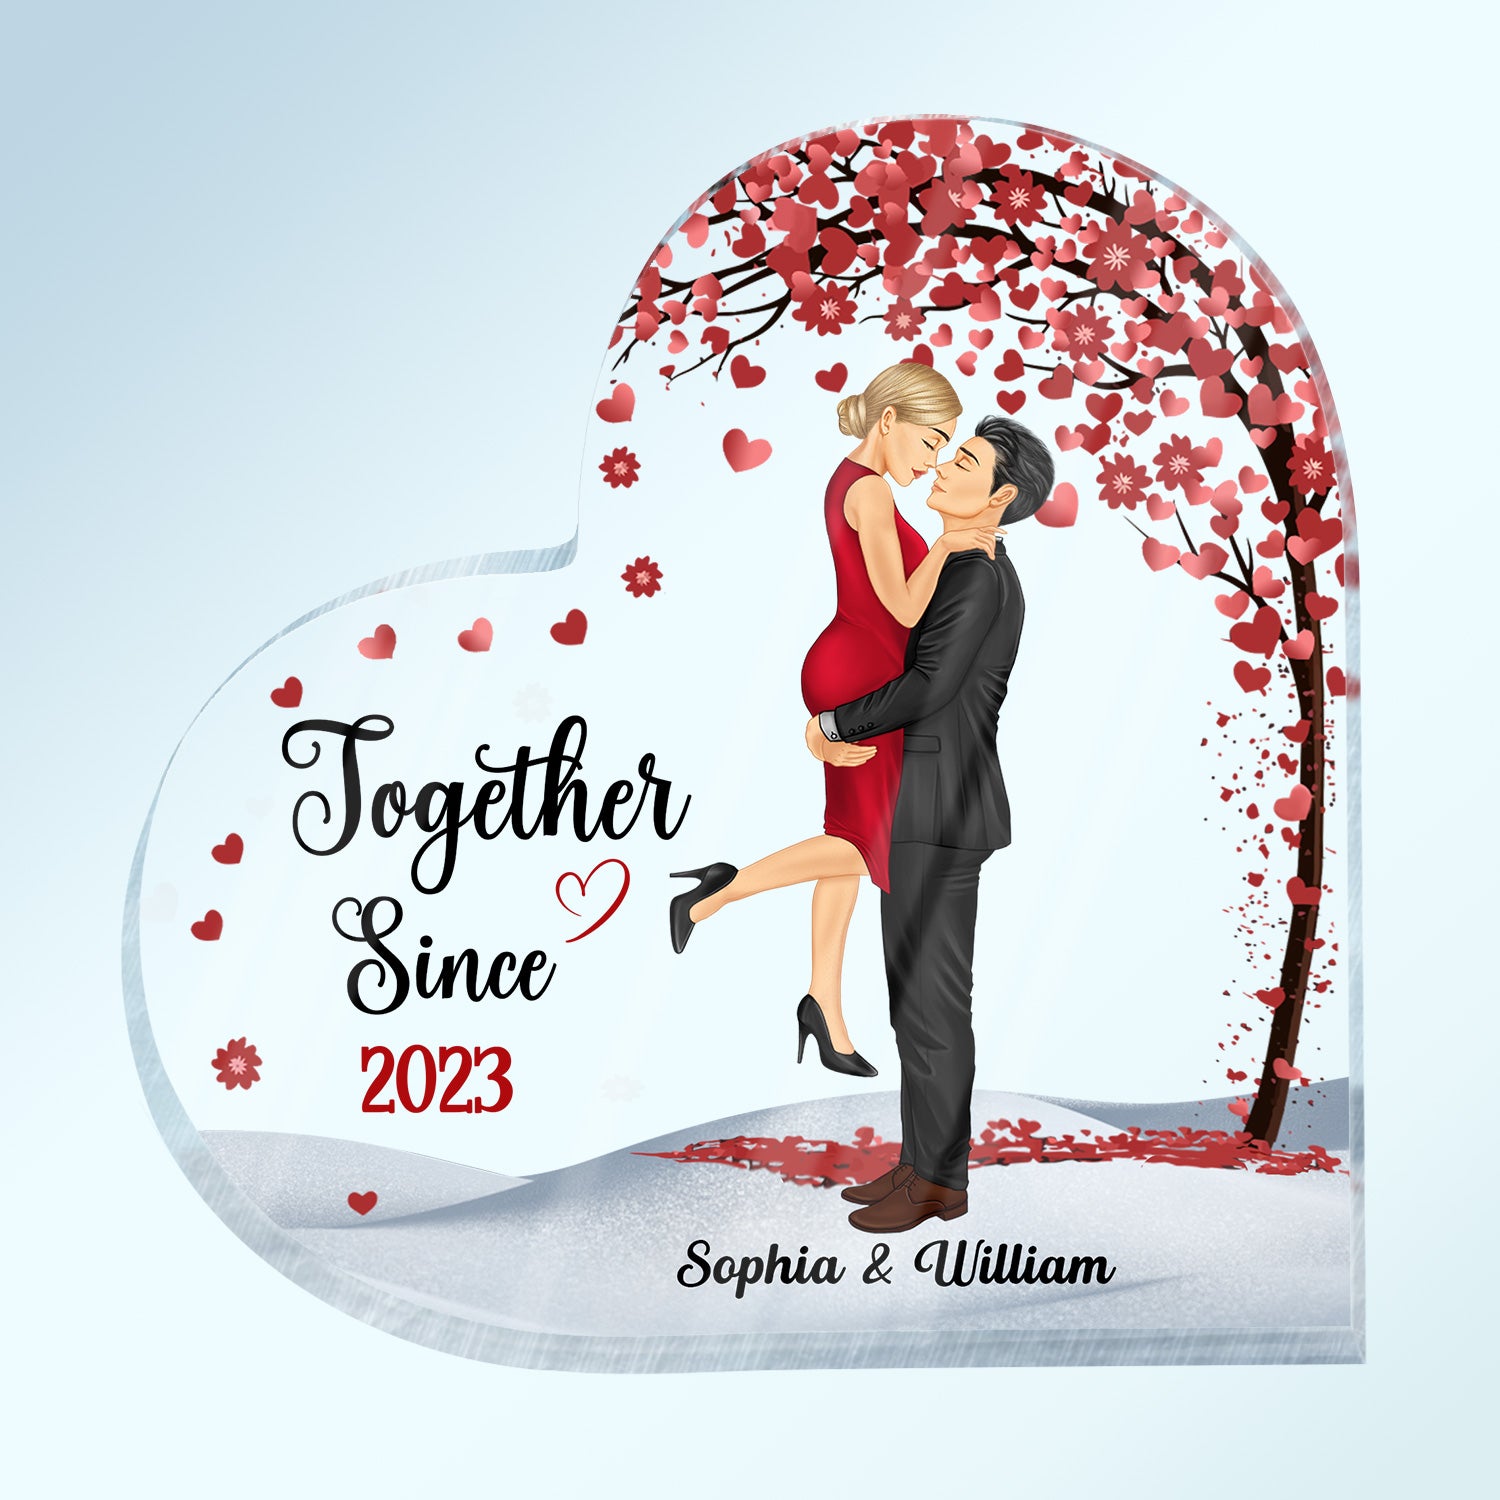 Family Couples Together Since I'm Yours - Anniversary, Birthday Gift For Spouse, Lover, Husband, Wife, Boyfriend, Girlfriend, Married Couple - Personalized Custom Heart Shaped Acrylic Plaque